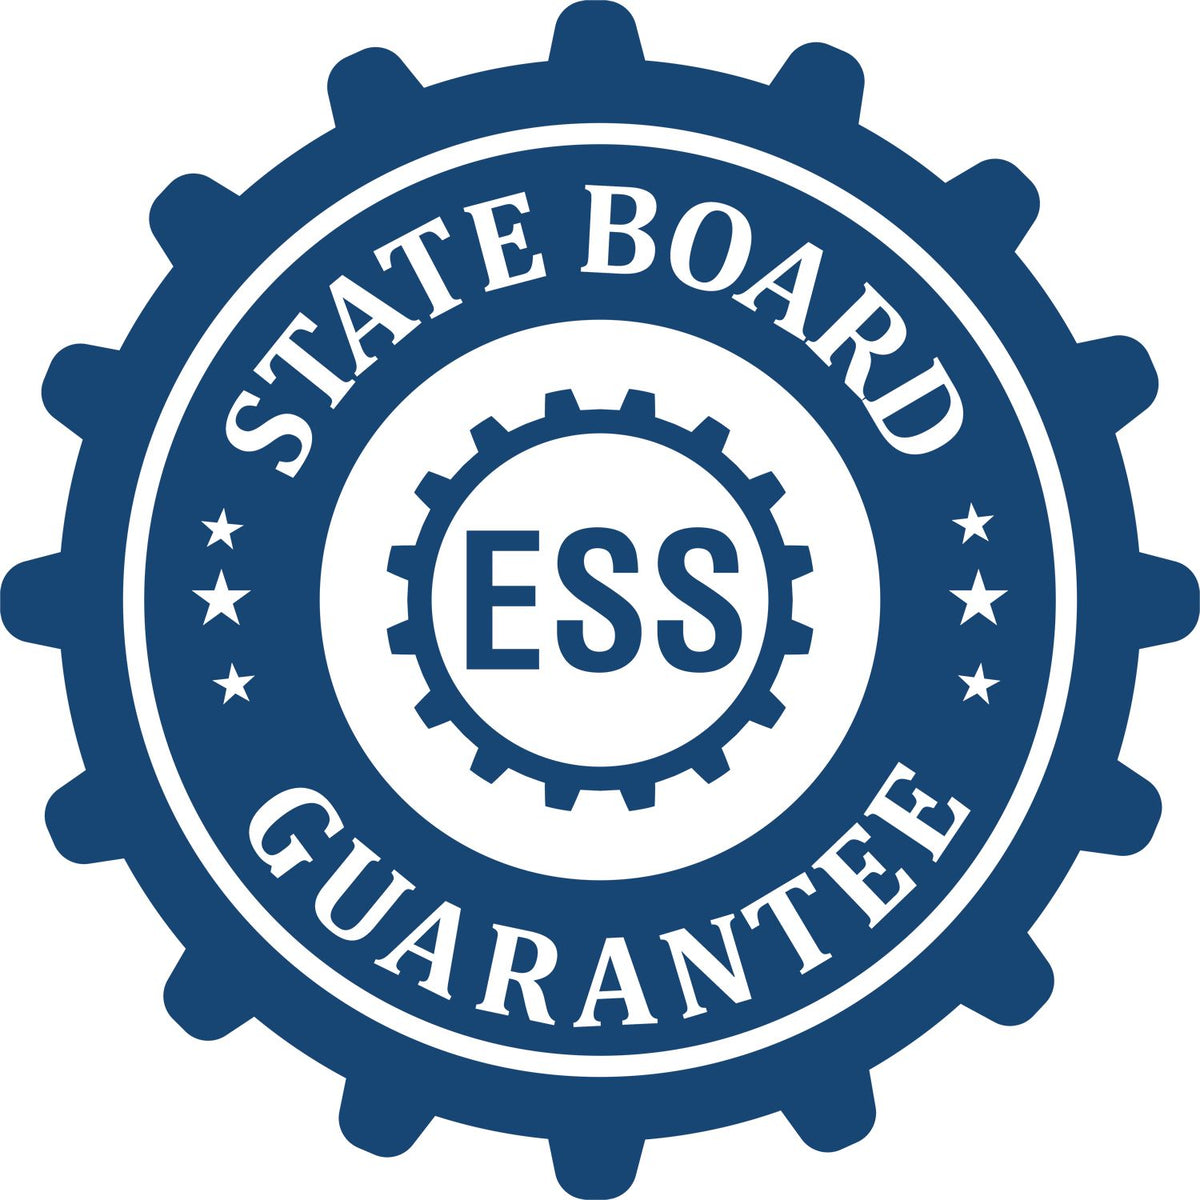 An emblem in a gear shape illustrating a state board guarantee for the Louisiana Landscape Architectural Seal Stamp product.